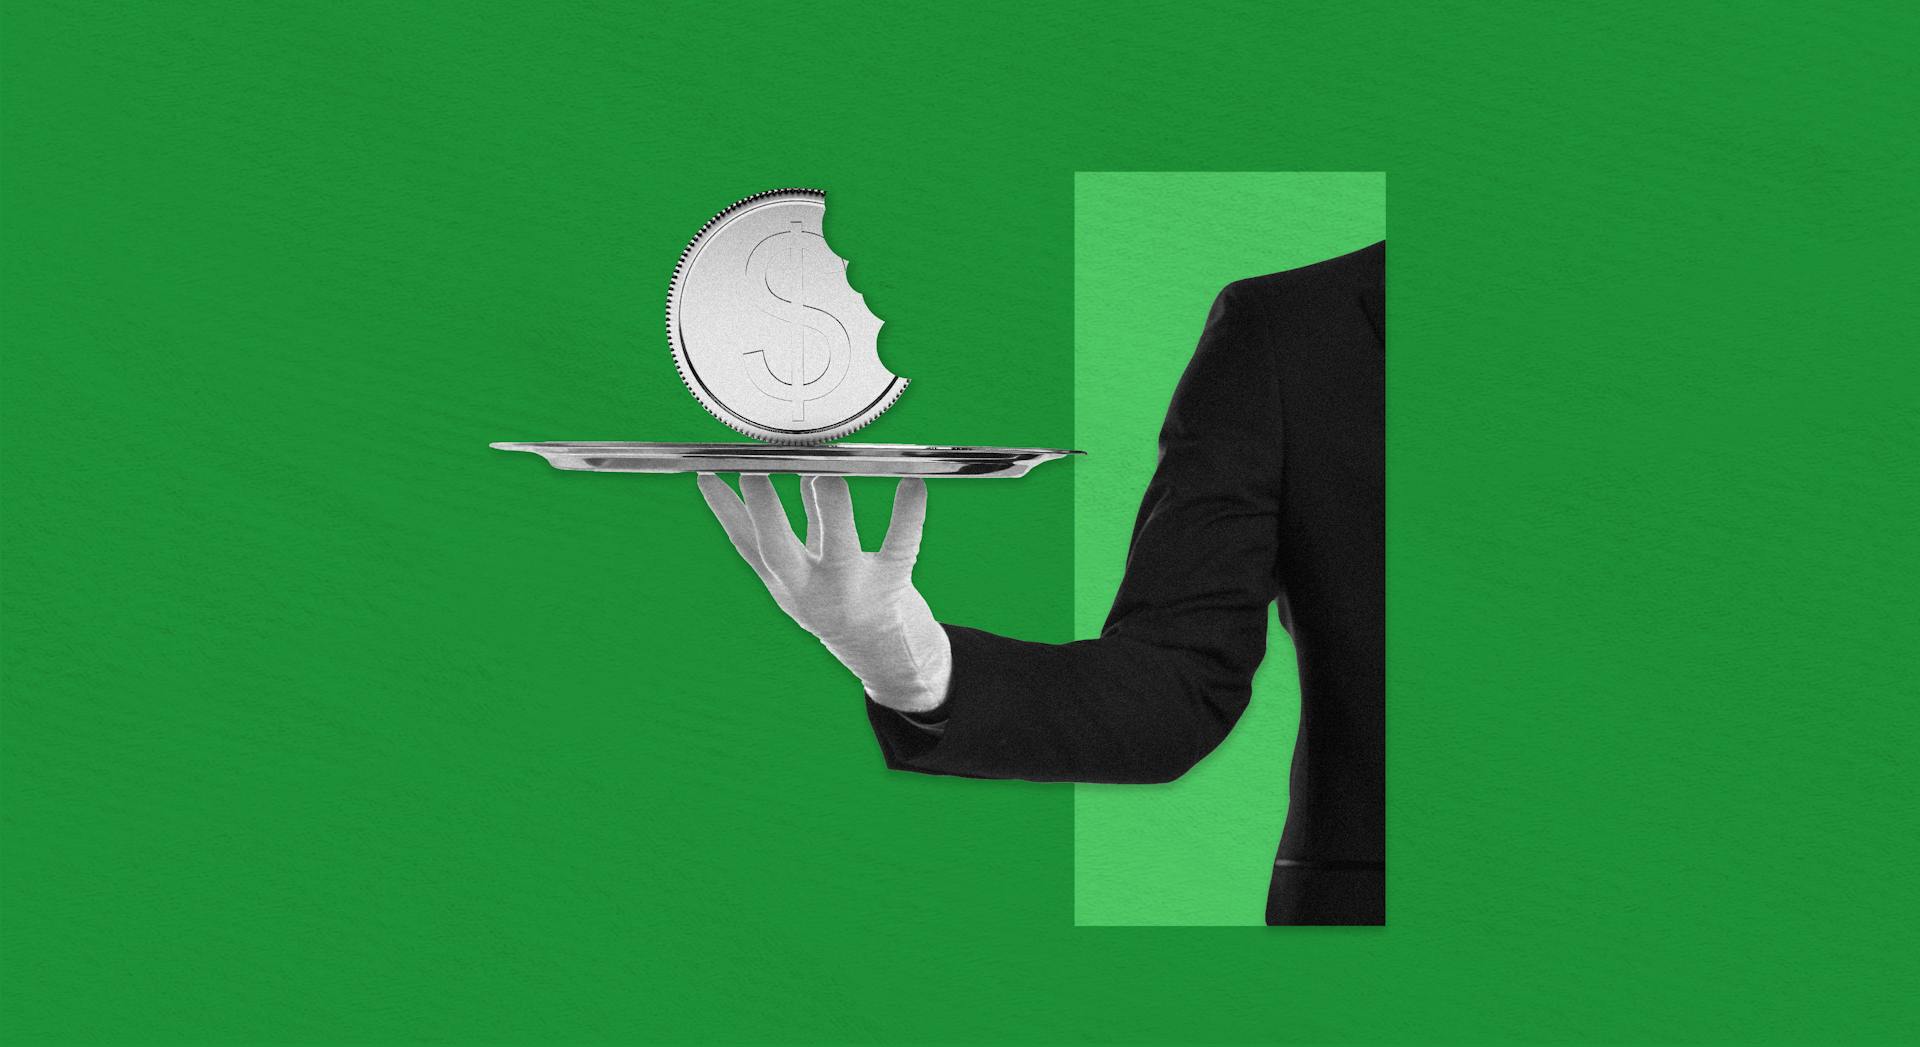 An illustration of someone holding a coin with a bite taken out of it - on a green background. 